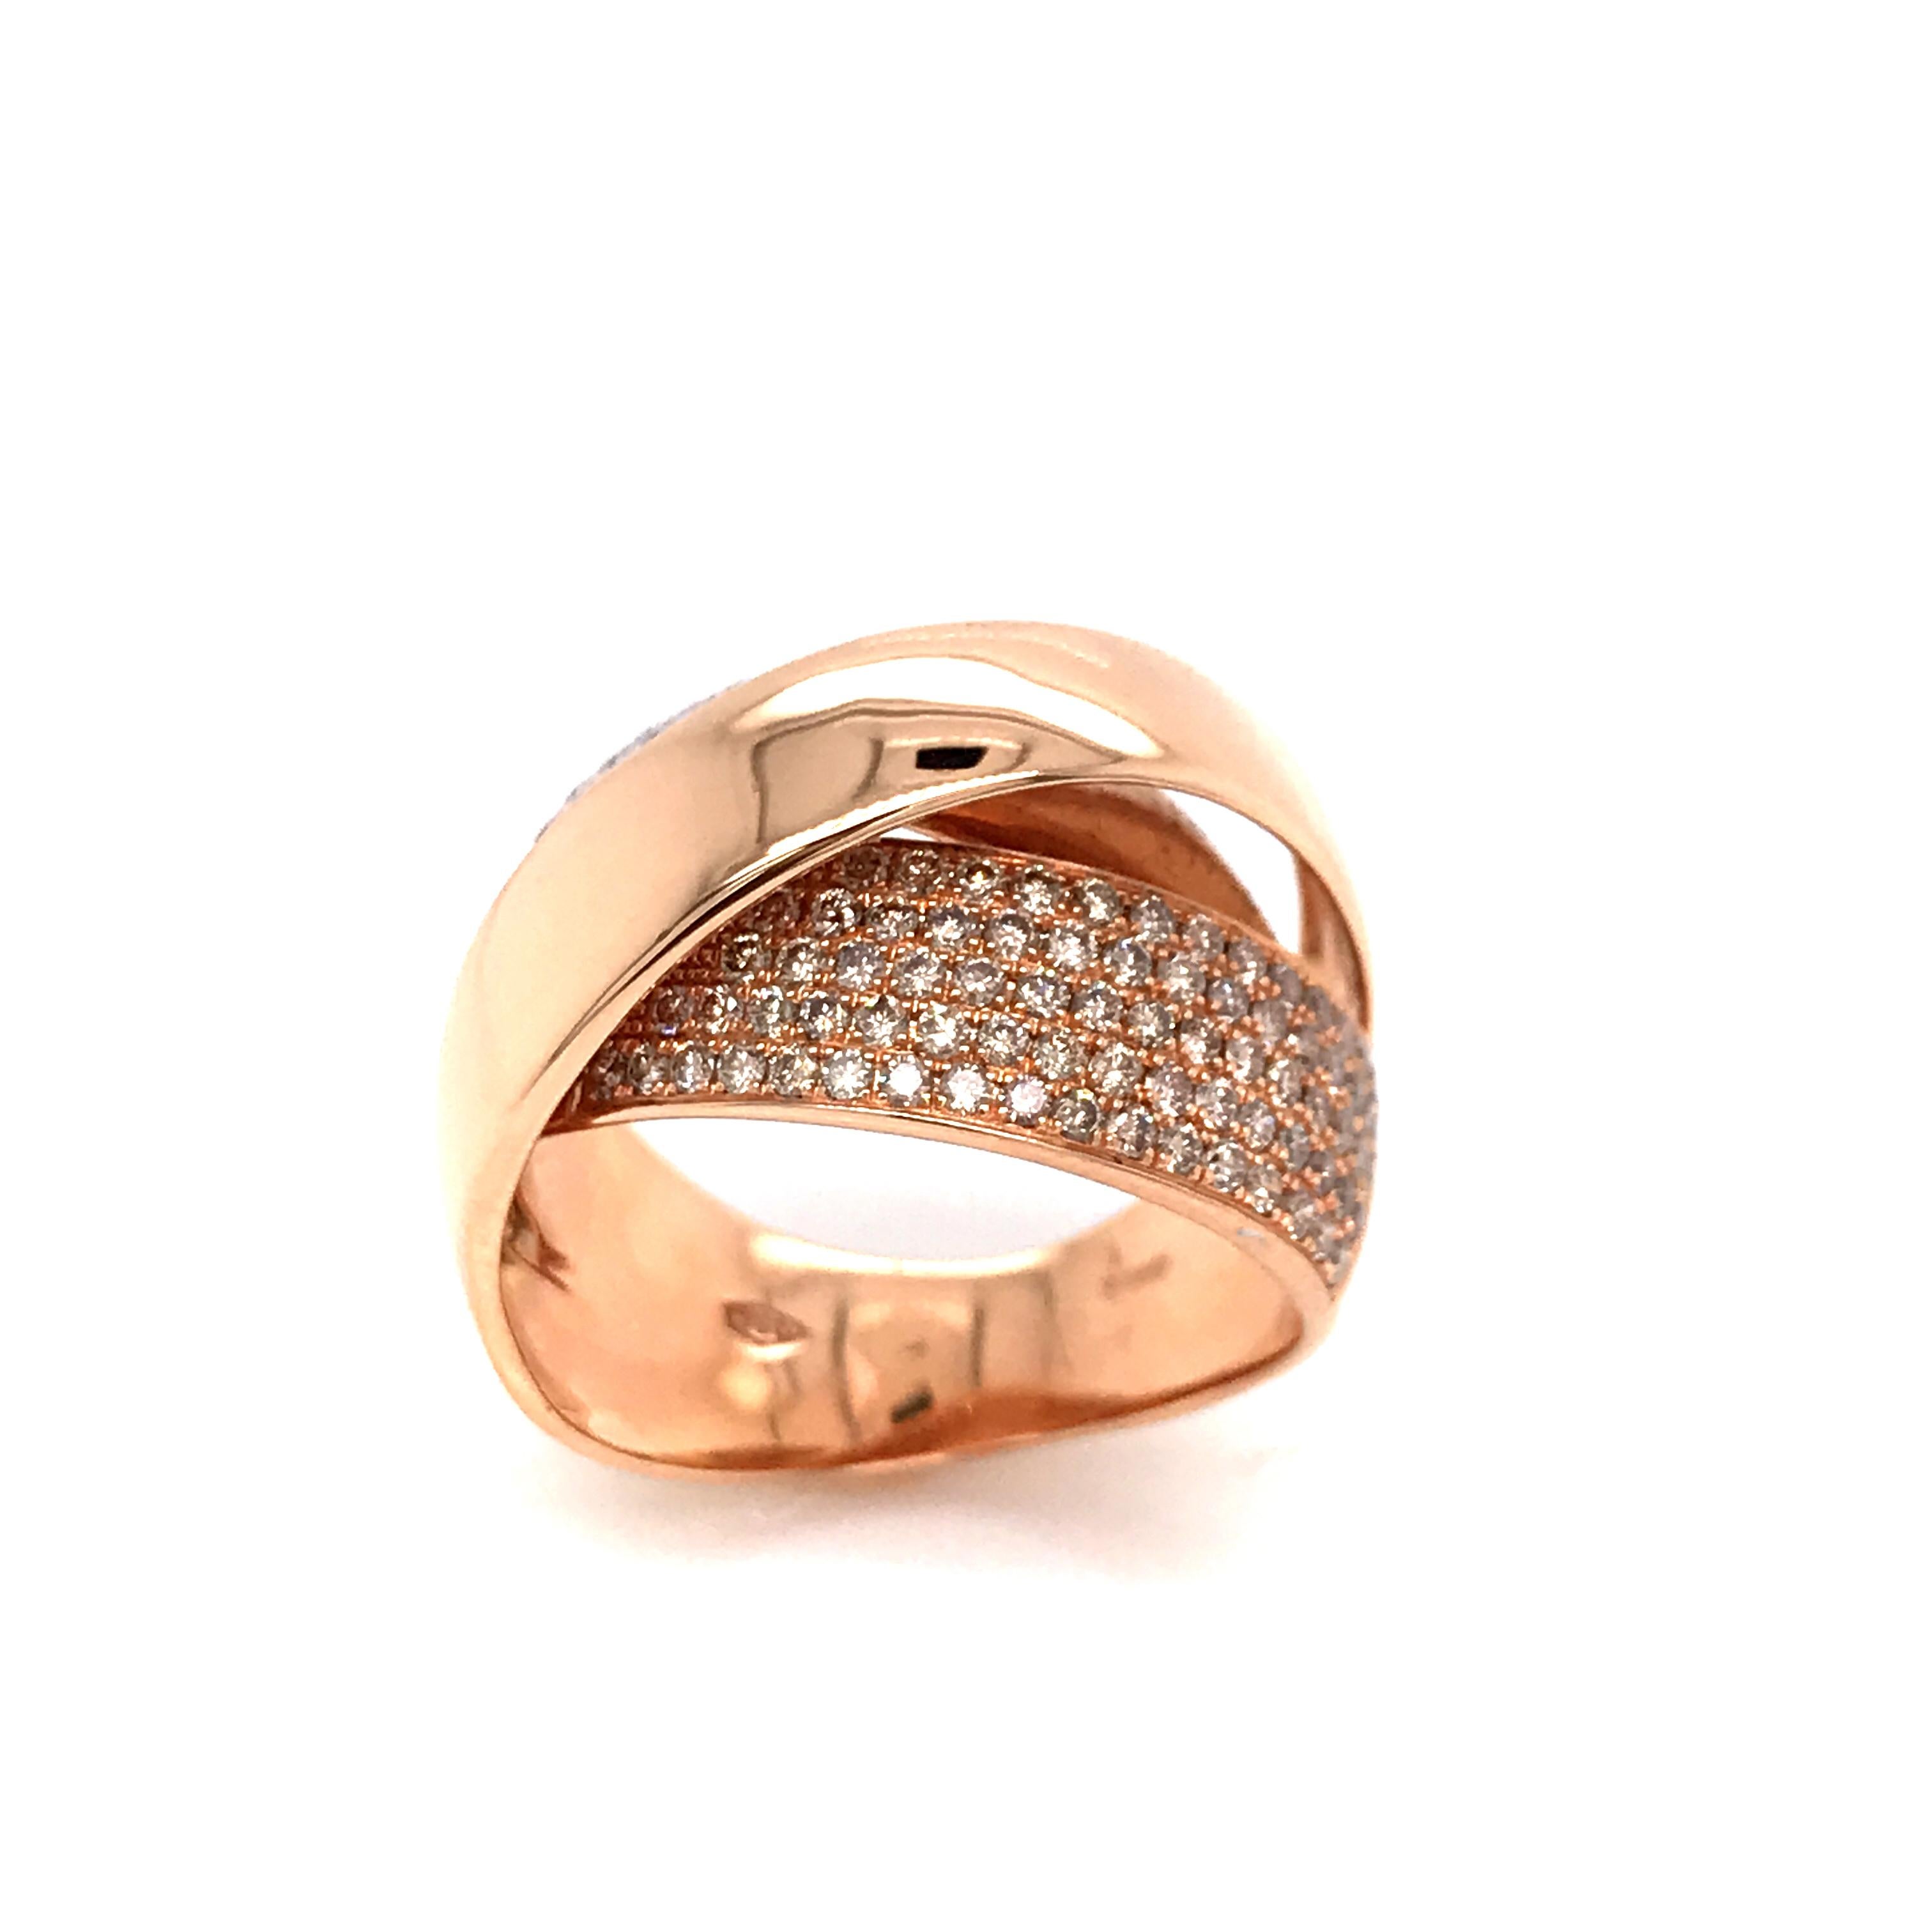 Welcome to mesure et art du temps, your premier destination for the most elegant and unique fashion jewelry. We are delighted to present you with this magnificent interlaced ring in 18-carat rose gold, featuring brilliant diamonds totaling 1.18